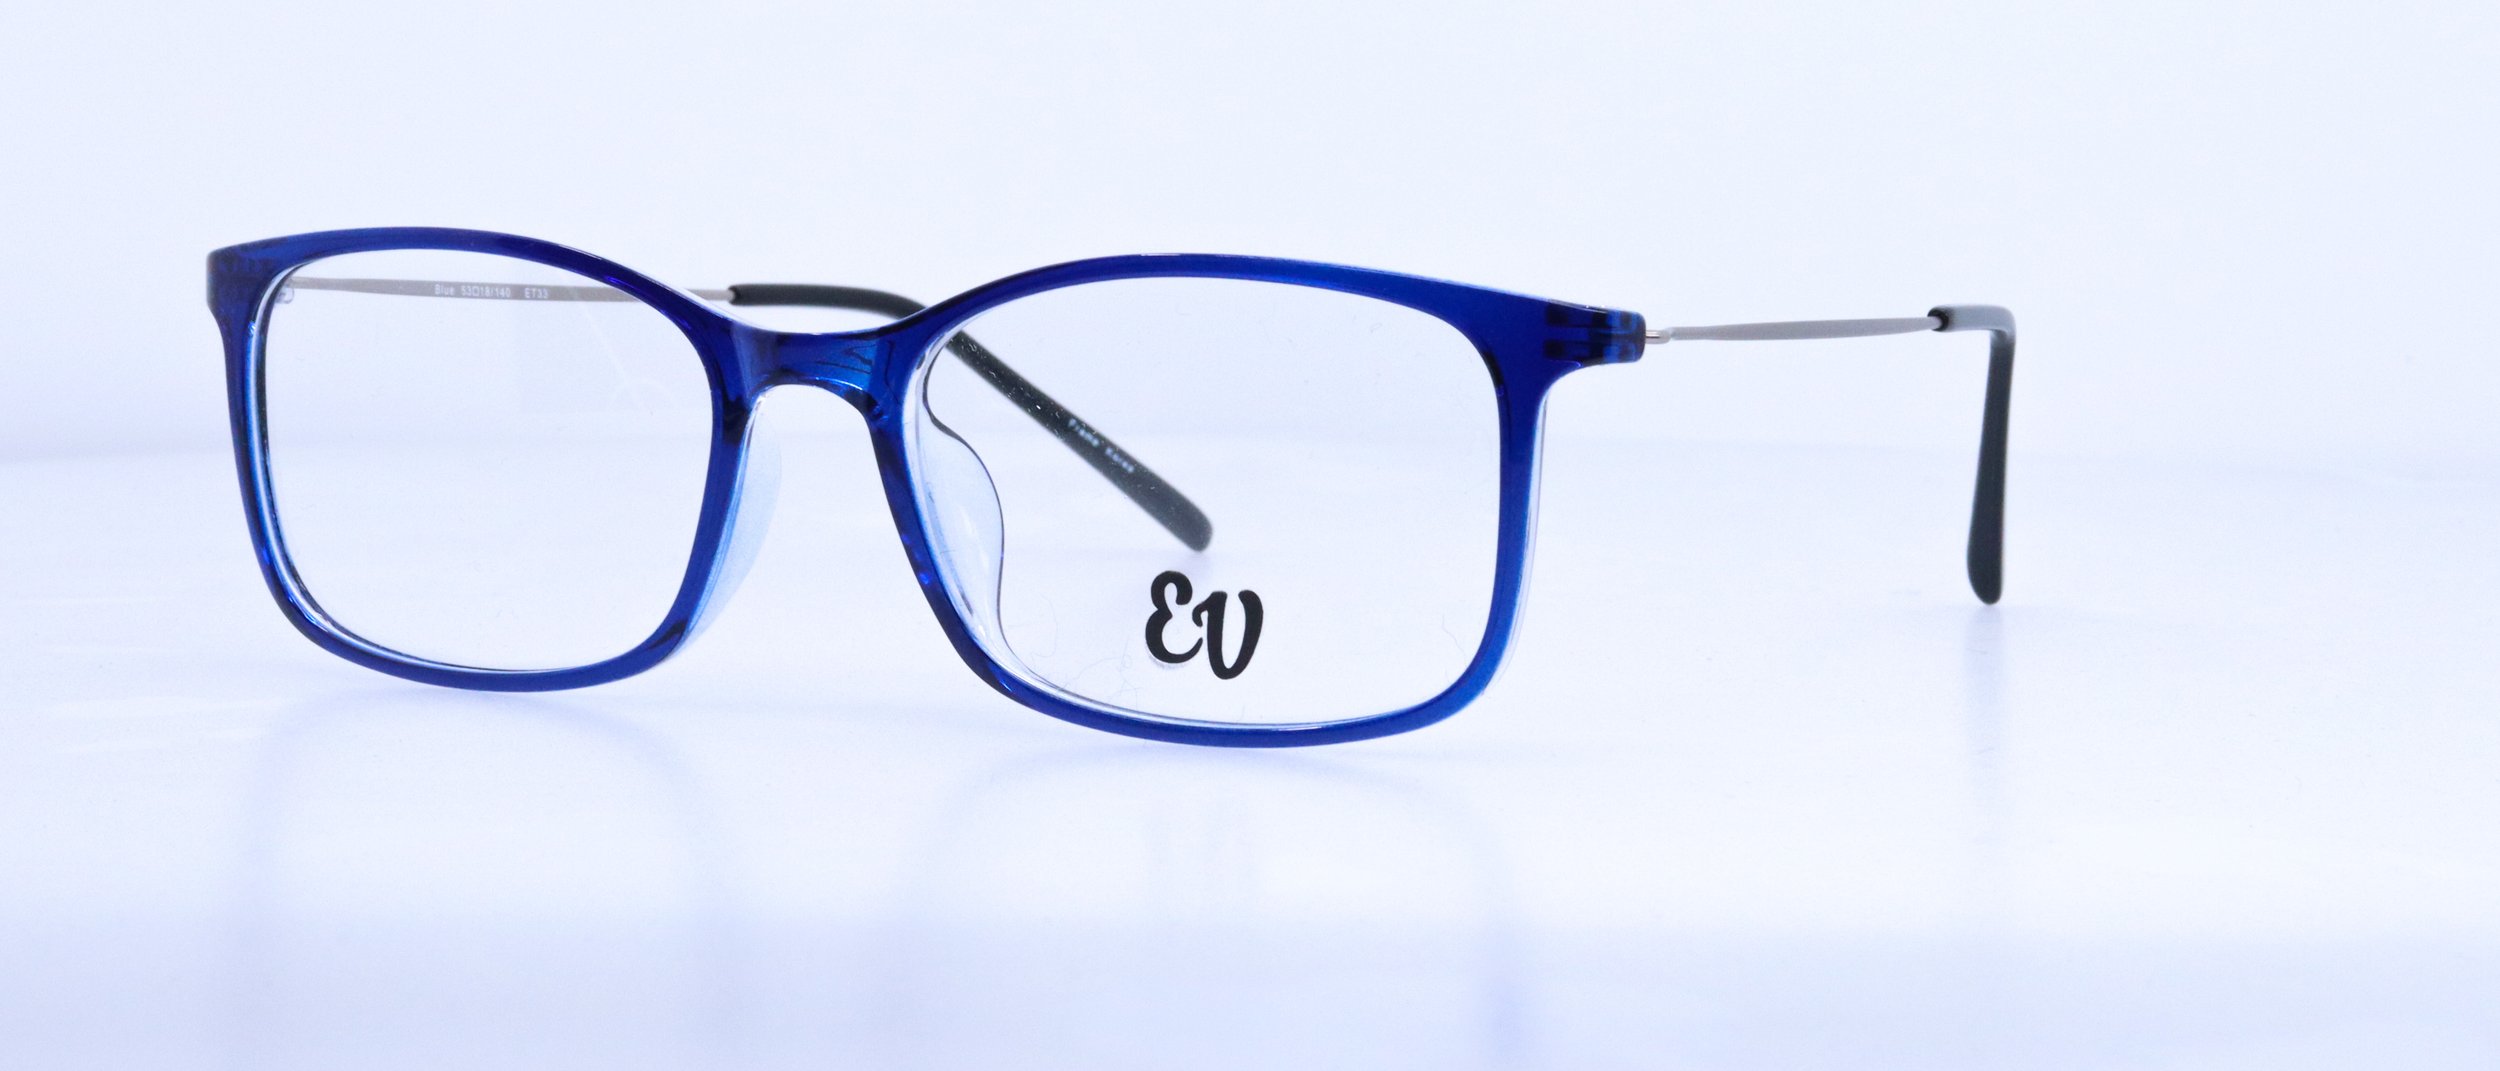  NEW!!! EV306: 53-18-140, Available in Black or Blue 